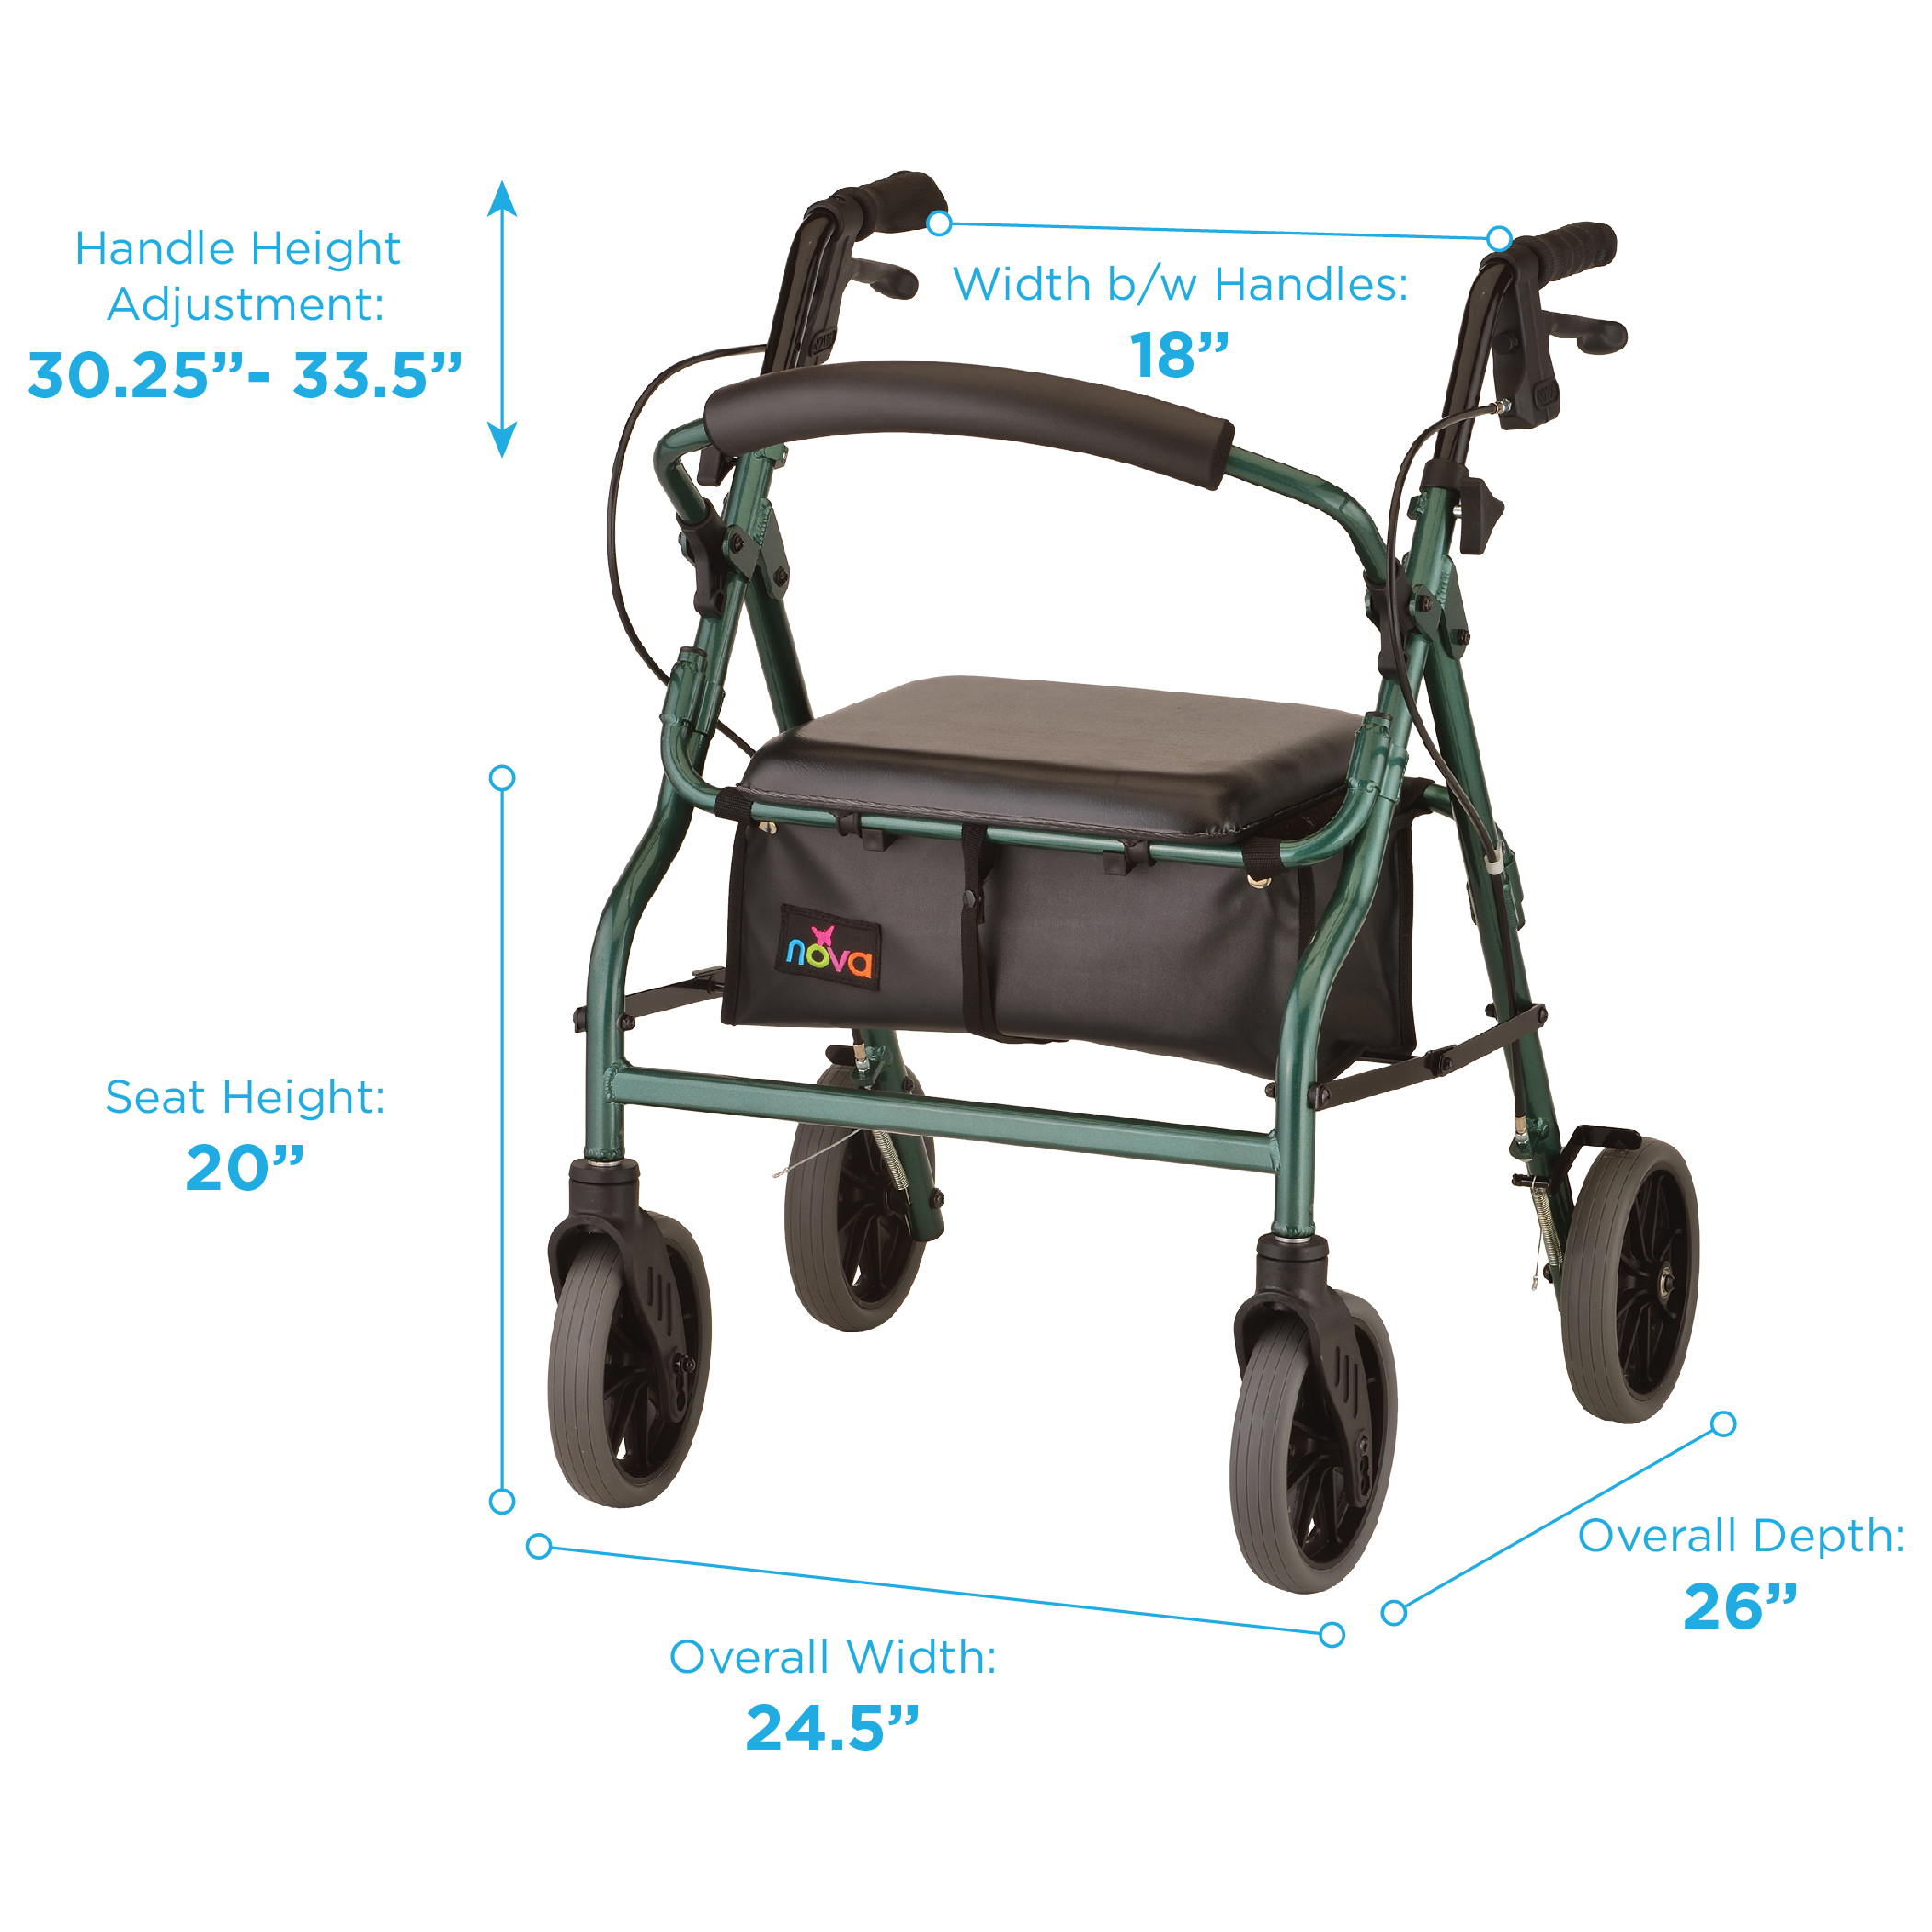 Image of the Zoom 20 Rolling Walker with specs.